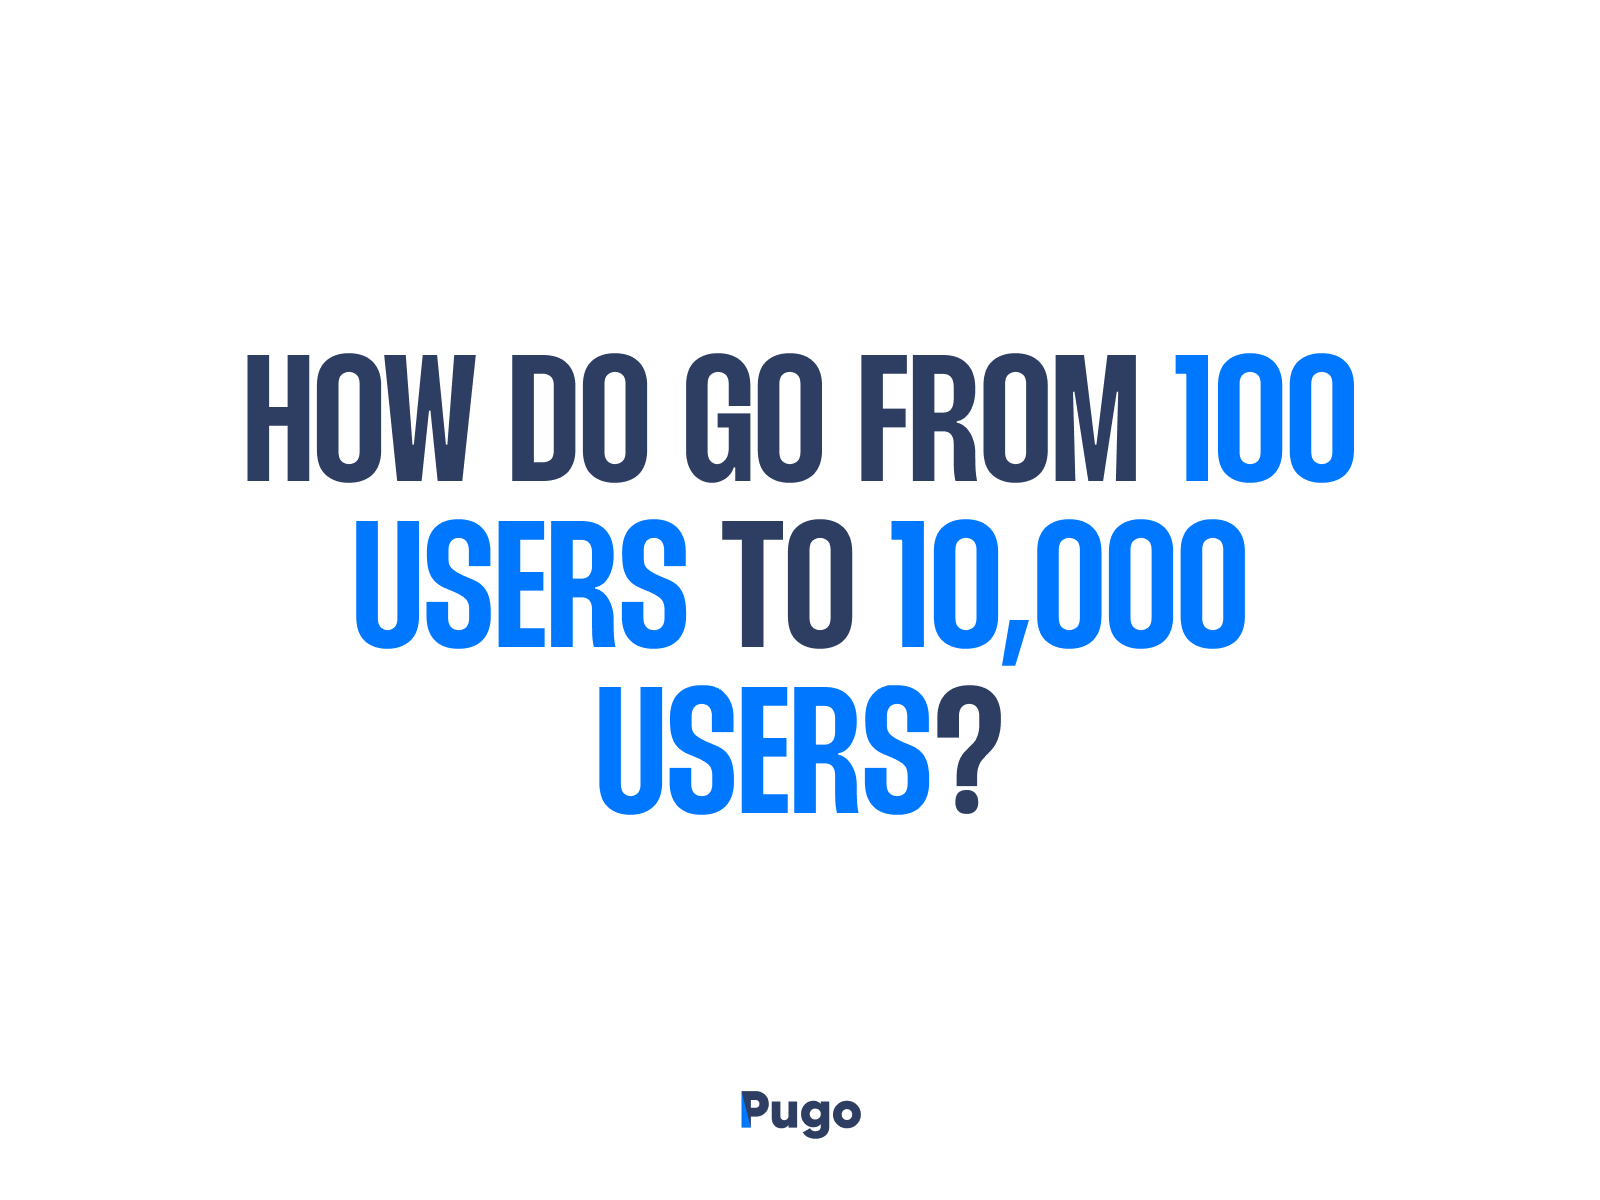 How do go from 100 users to 10,000 users?